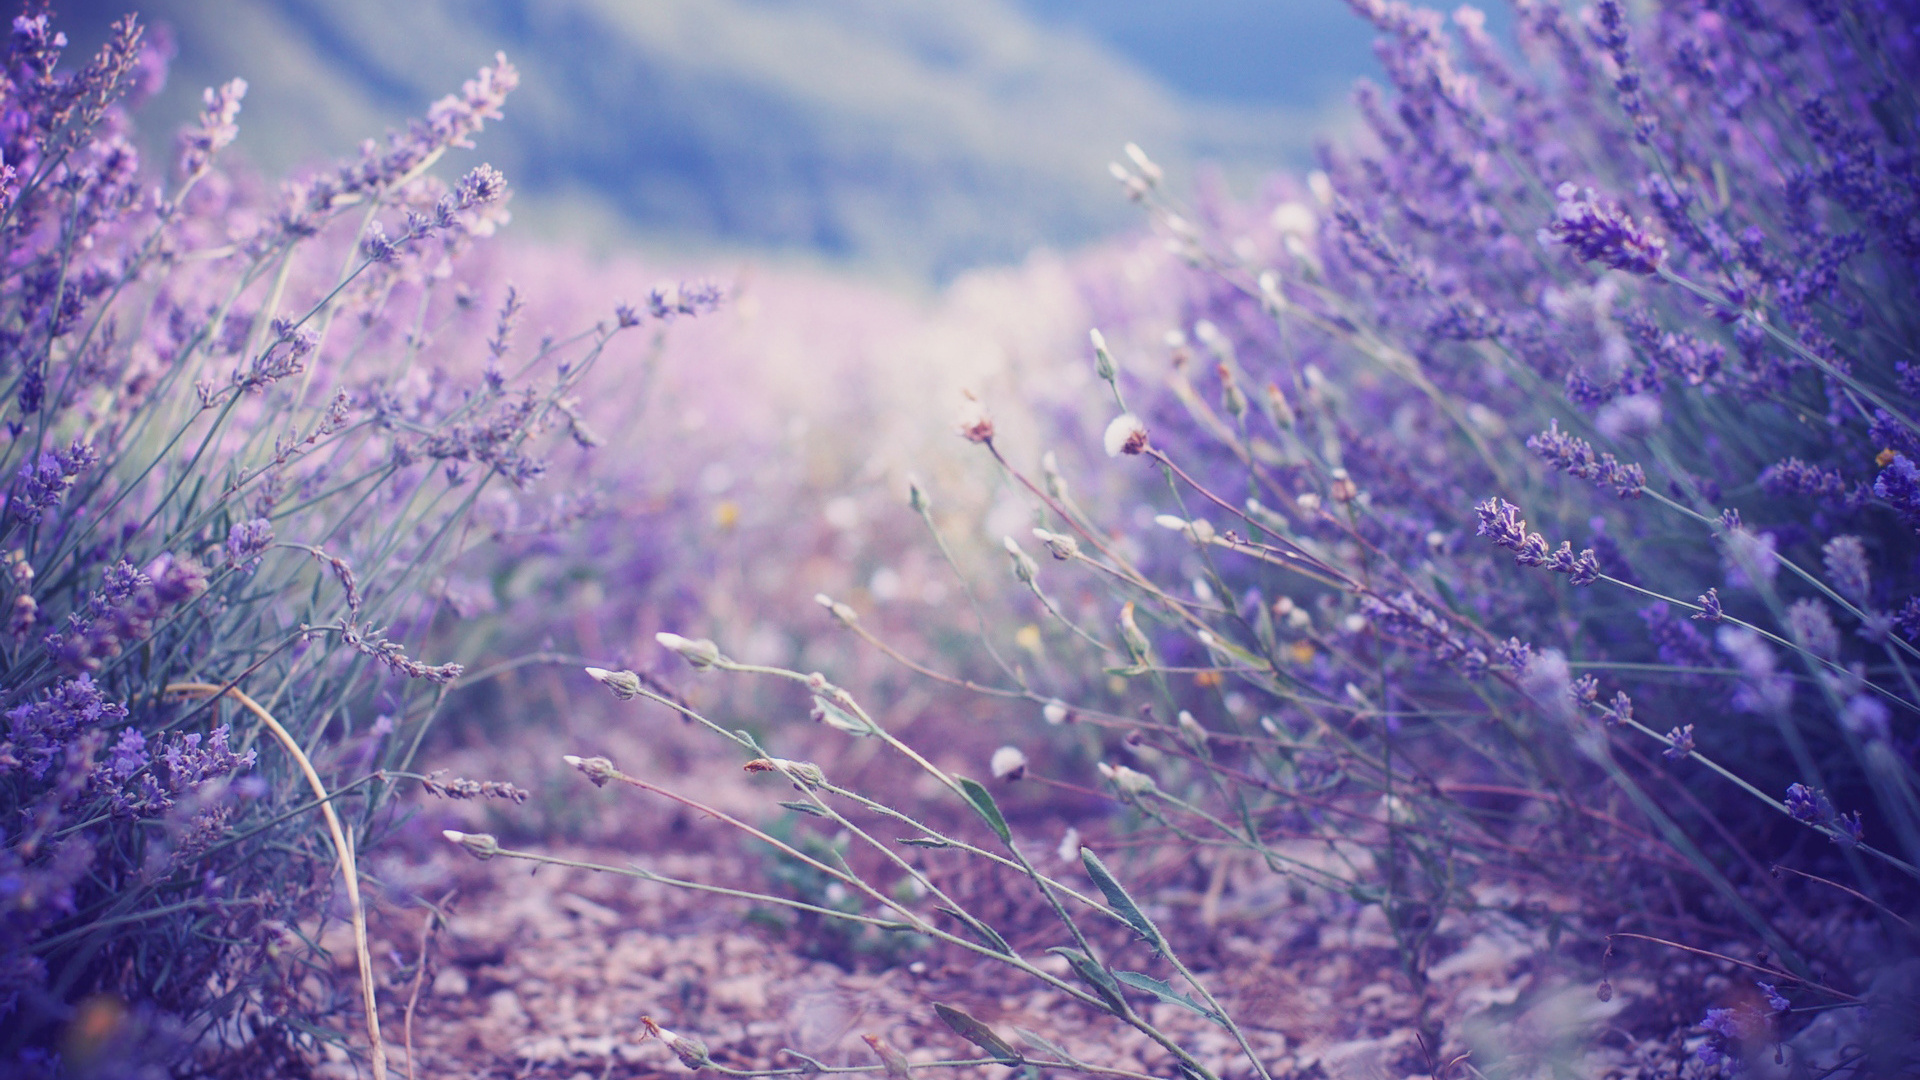 Lavender Flowers Wallpapers   Wallpaper High Definition High Quality